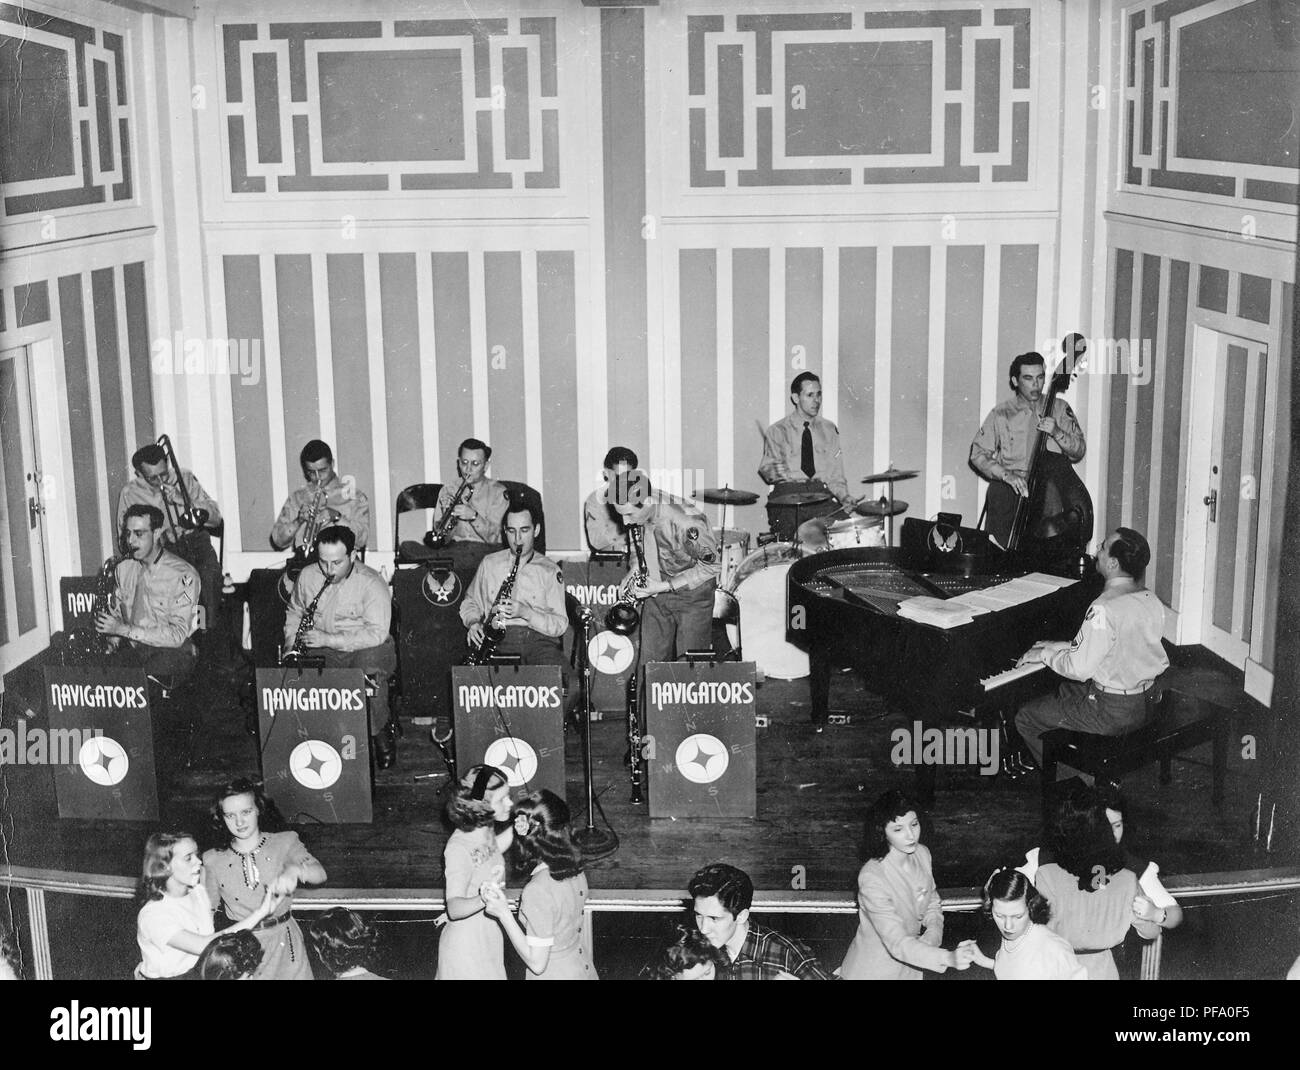 Black and white photograph, showing 11 male members of the 'Navigators' big band, wearing military clothes, sitting and standing on a dais, and playing a variety of instruments, including horns, saxophone, drums, bass, and piano, with a winged-star symbol on a stand at rear suggesting an Air Force affiliation, and with dancers, mostly female, visible in the foreground, likely photographed in Ohio, during World War II, 1945. () Stock Photo